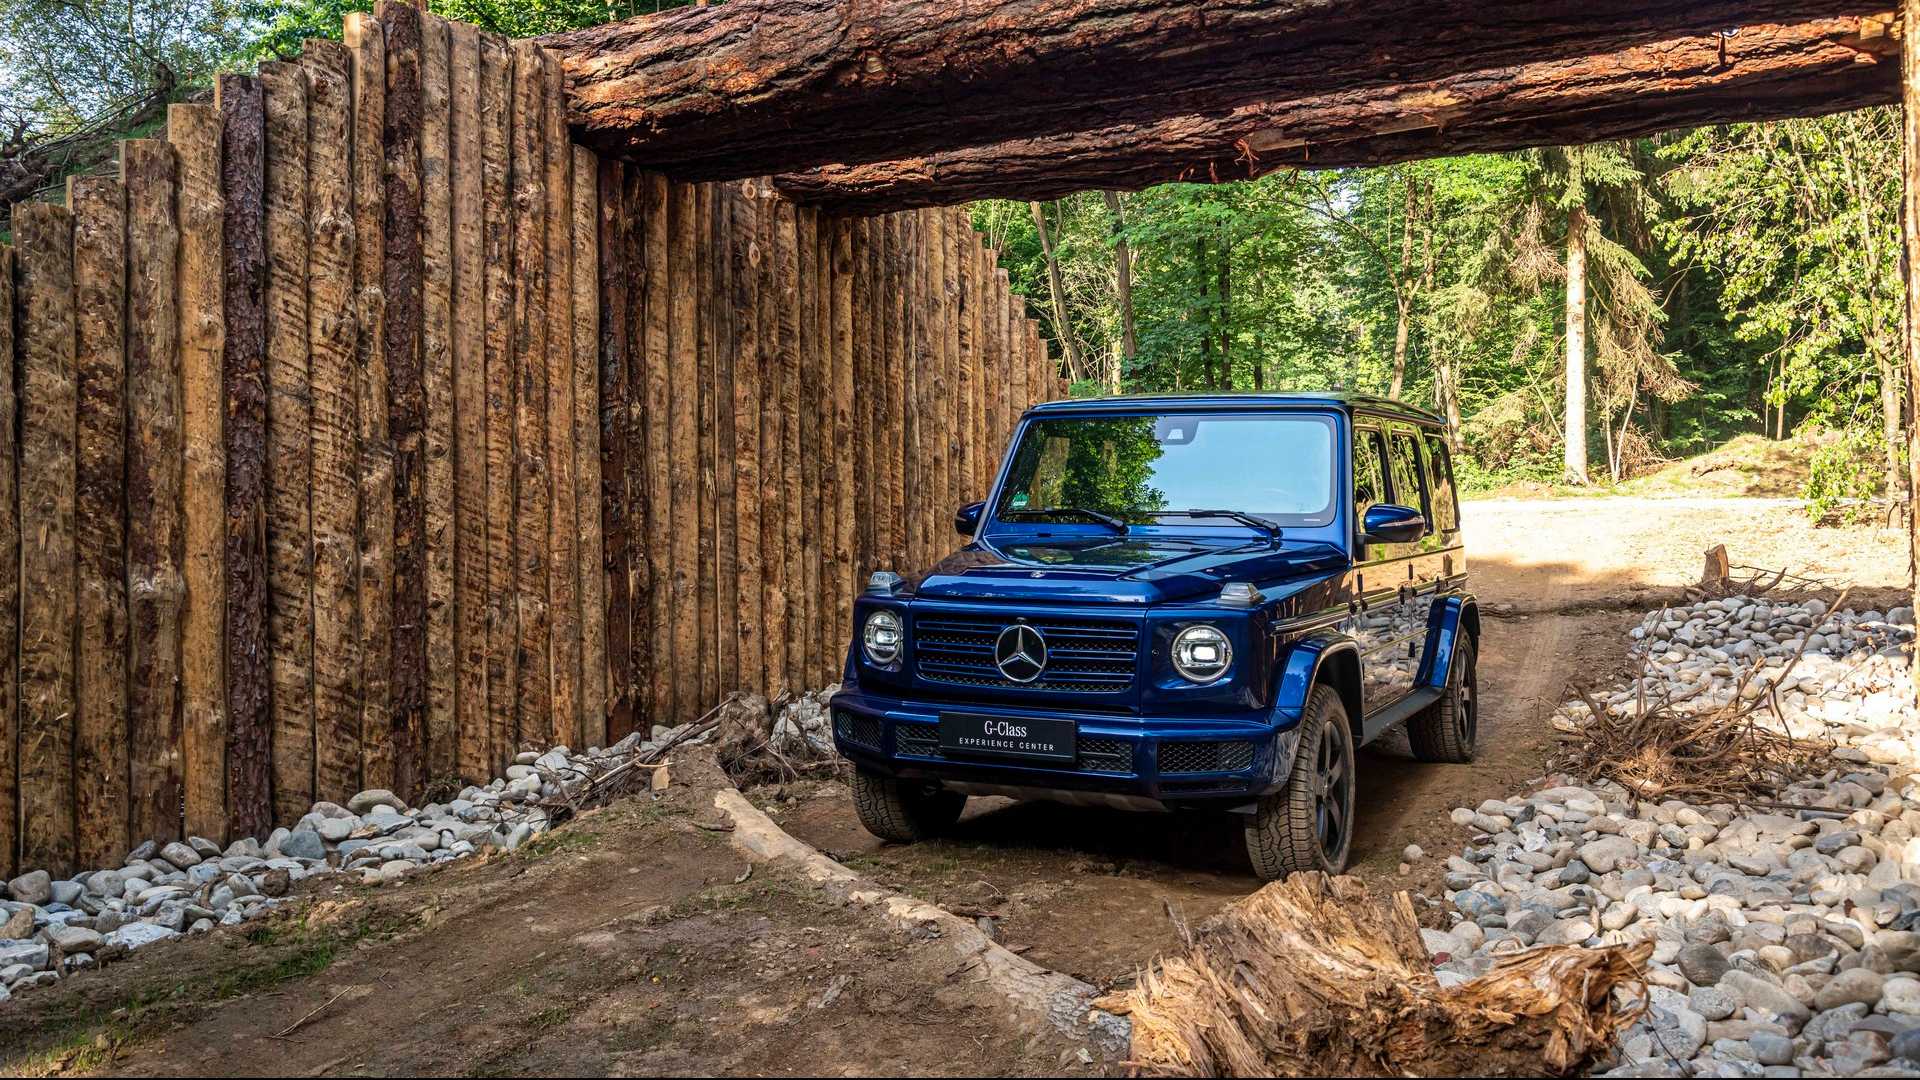 Mercedes-Benz celebrates 40 iconic years of the G-Class with special editions